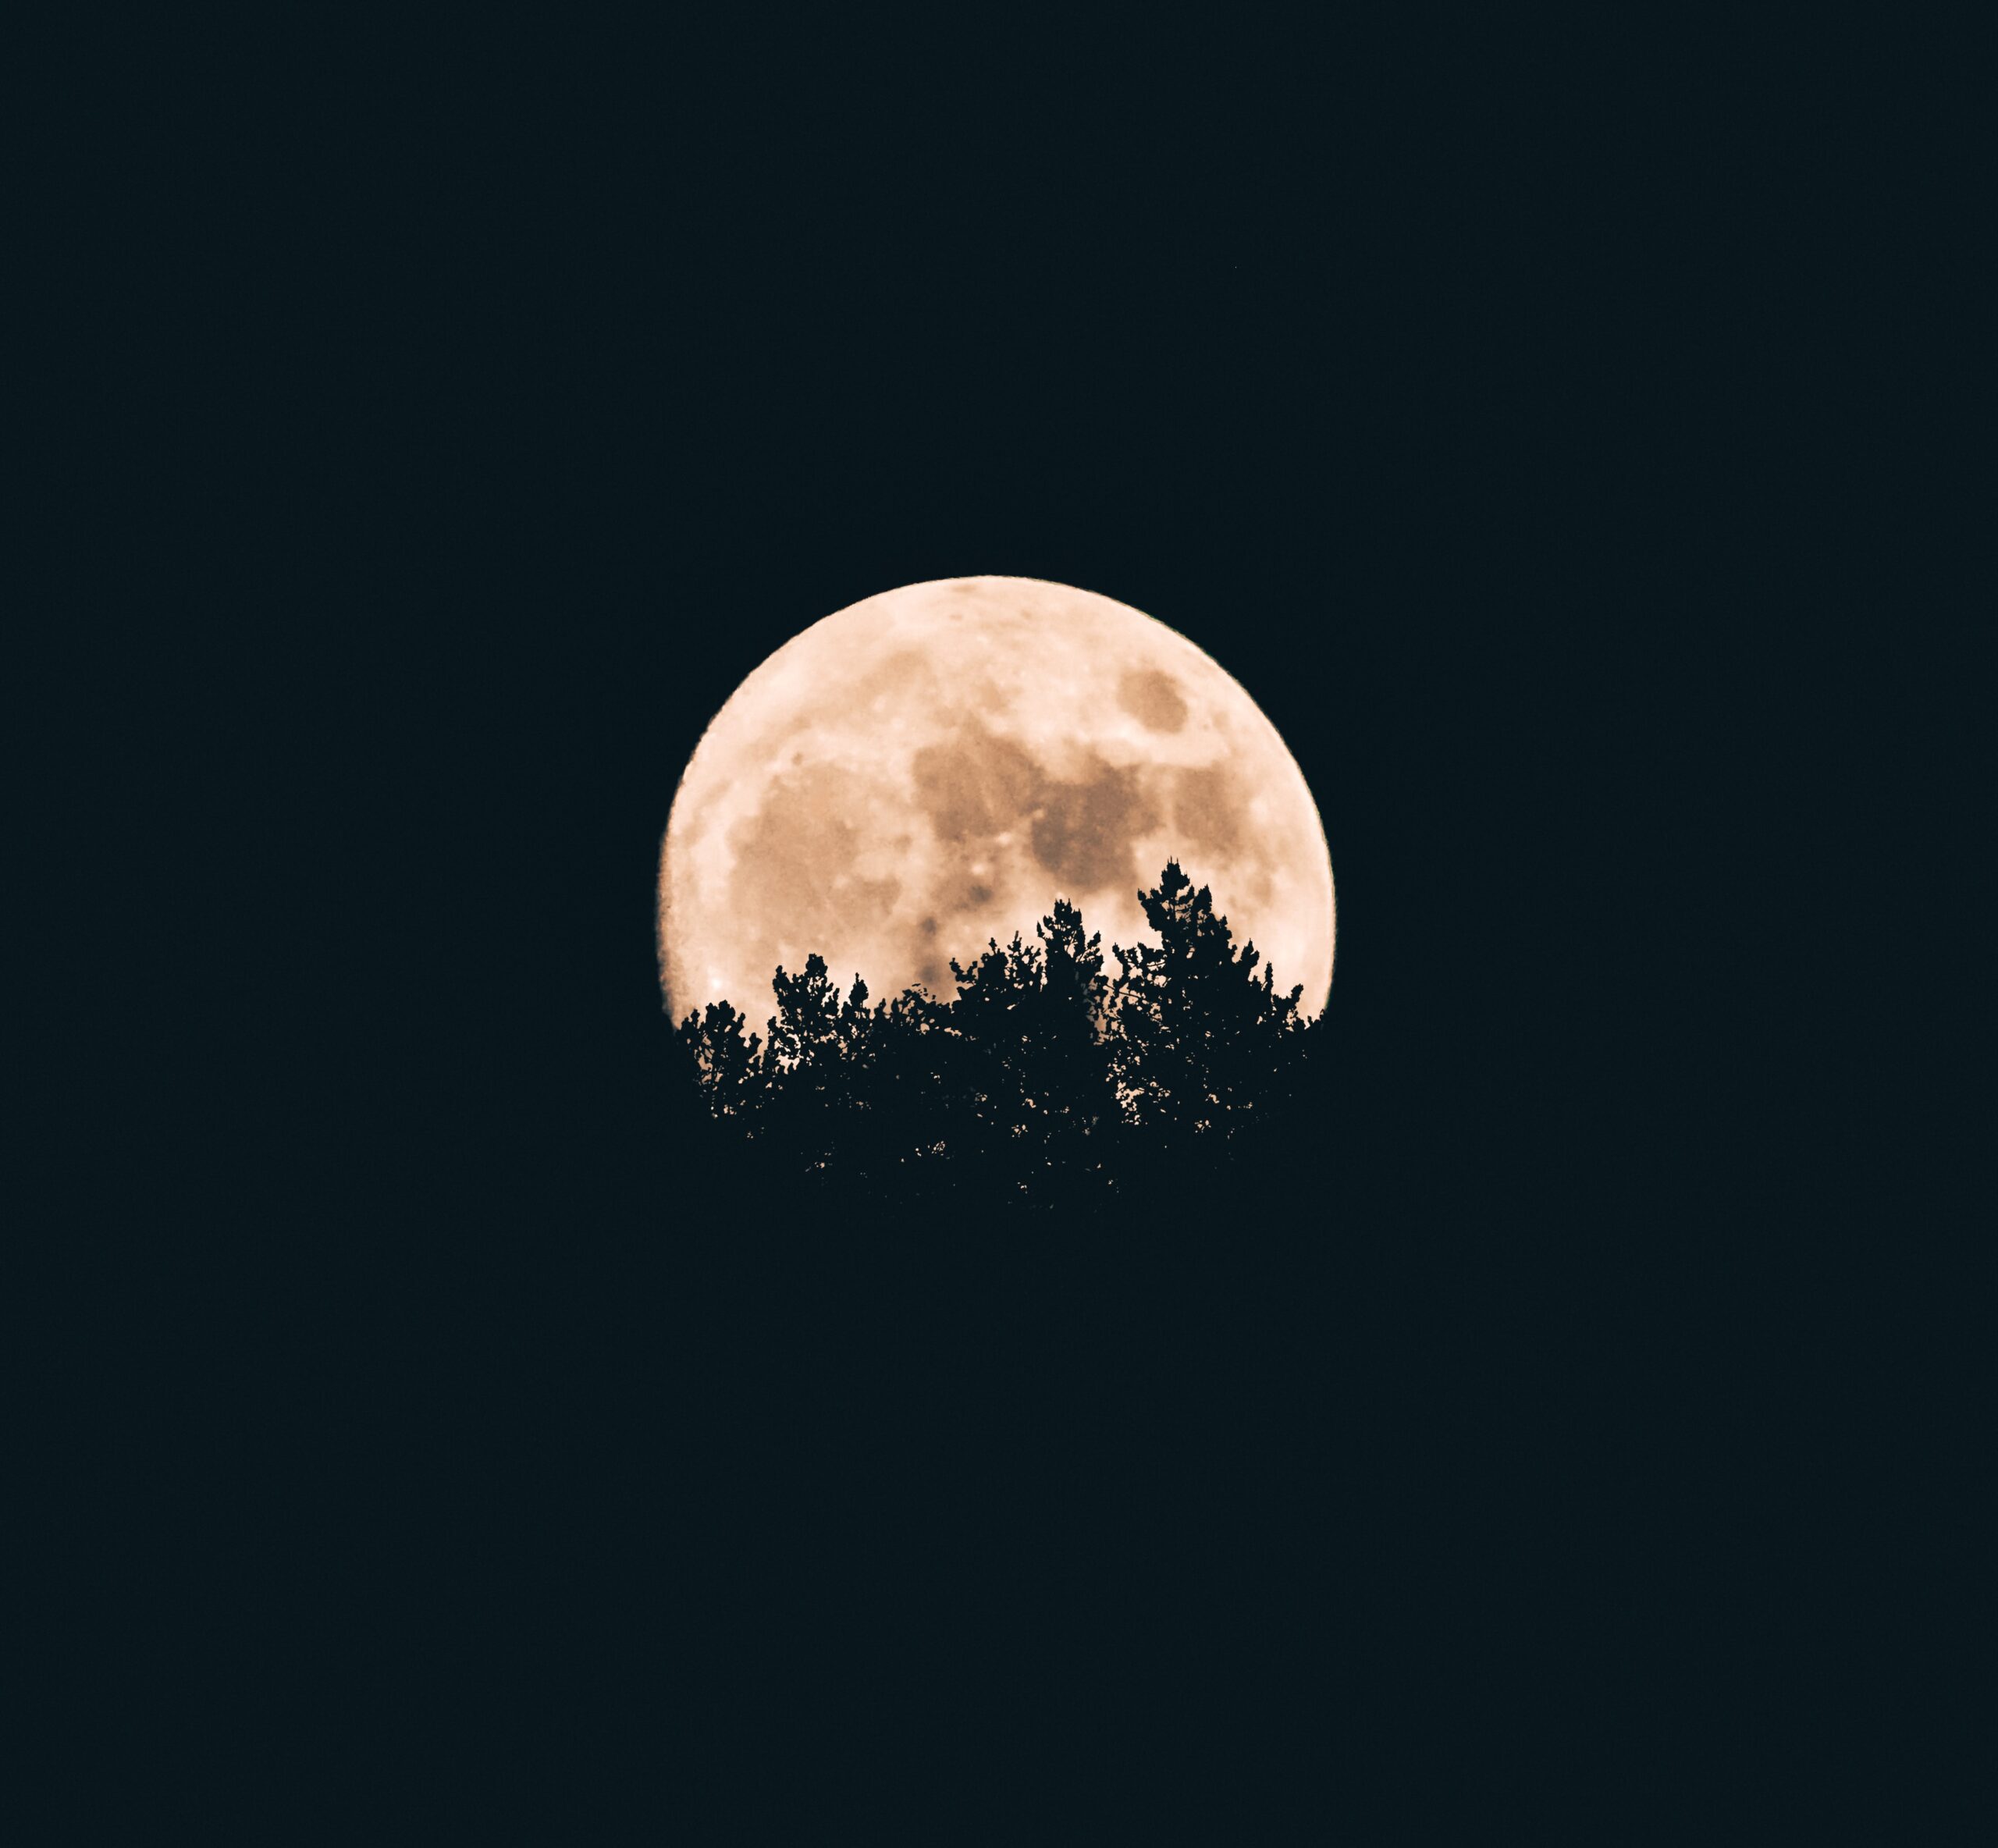 Full moon behind a tree silhouette